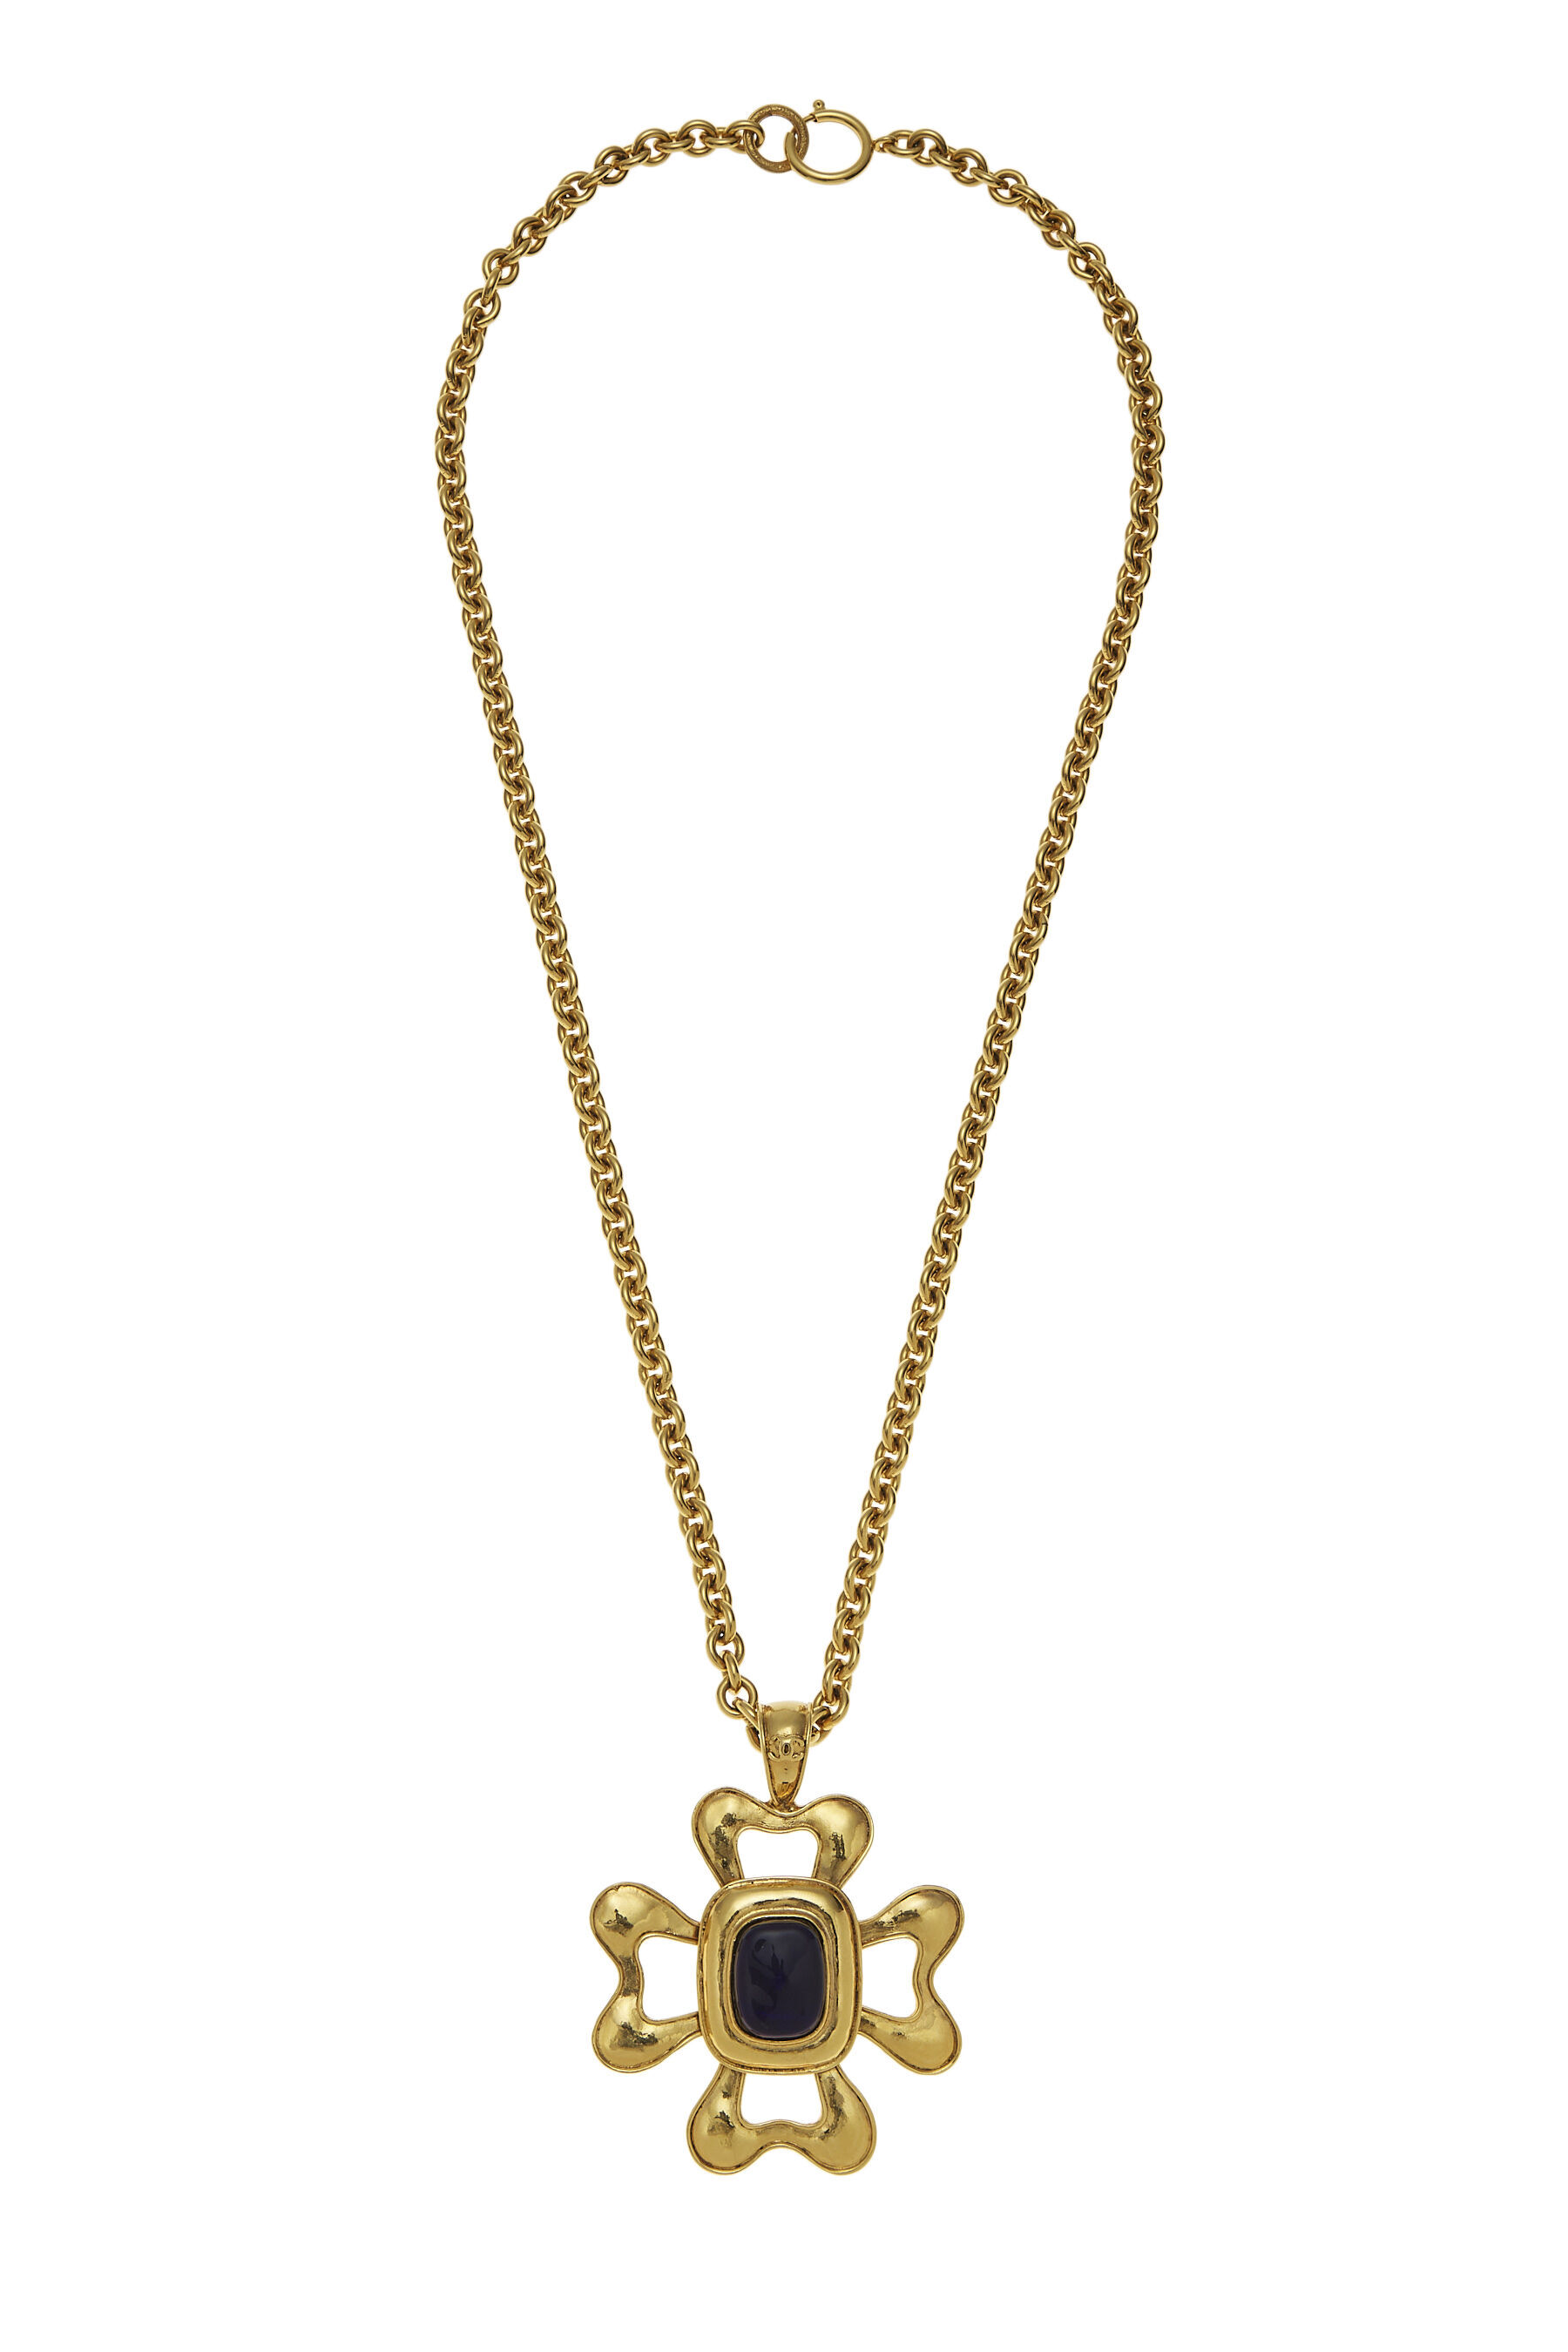 Sold at Auction: Chanel Gold Plated Clover Pendant Necklace, 1996 Pendant-  H.- 1 7/8 in., W.- 1 7/8 in.; Chain- L.- 22 in.